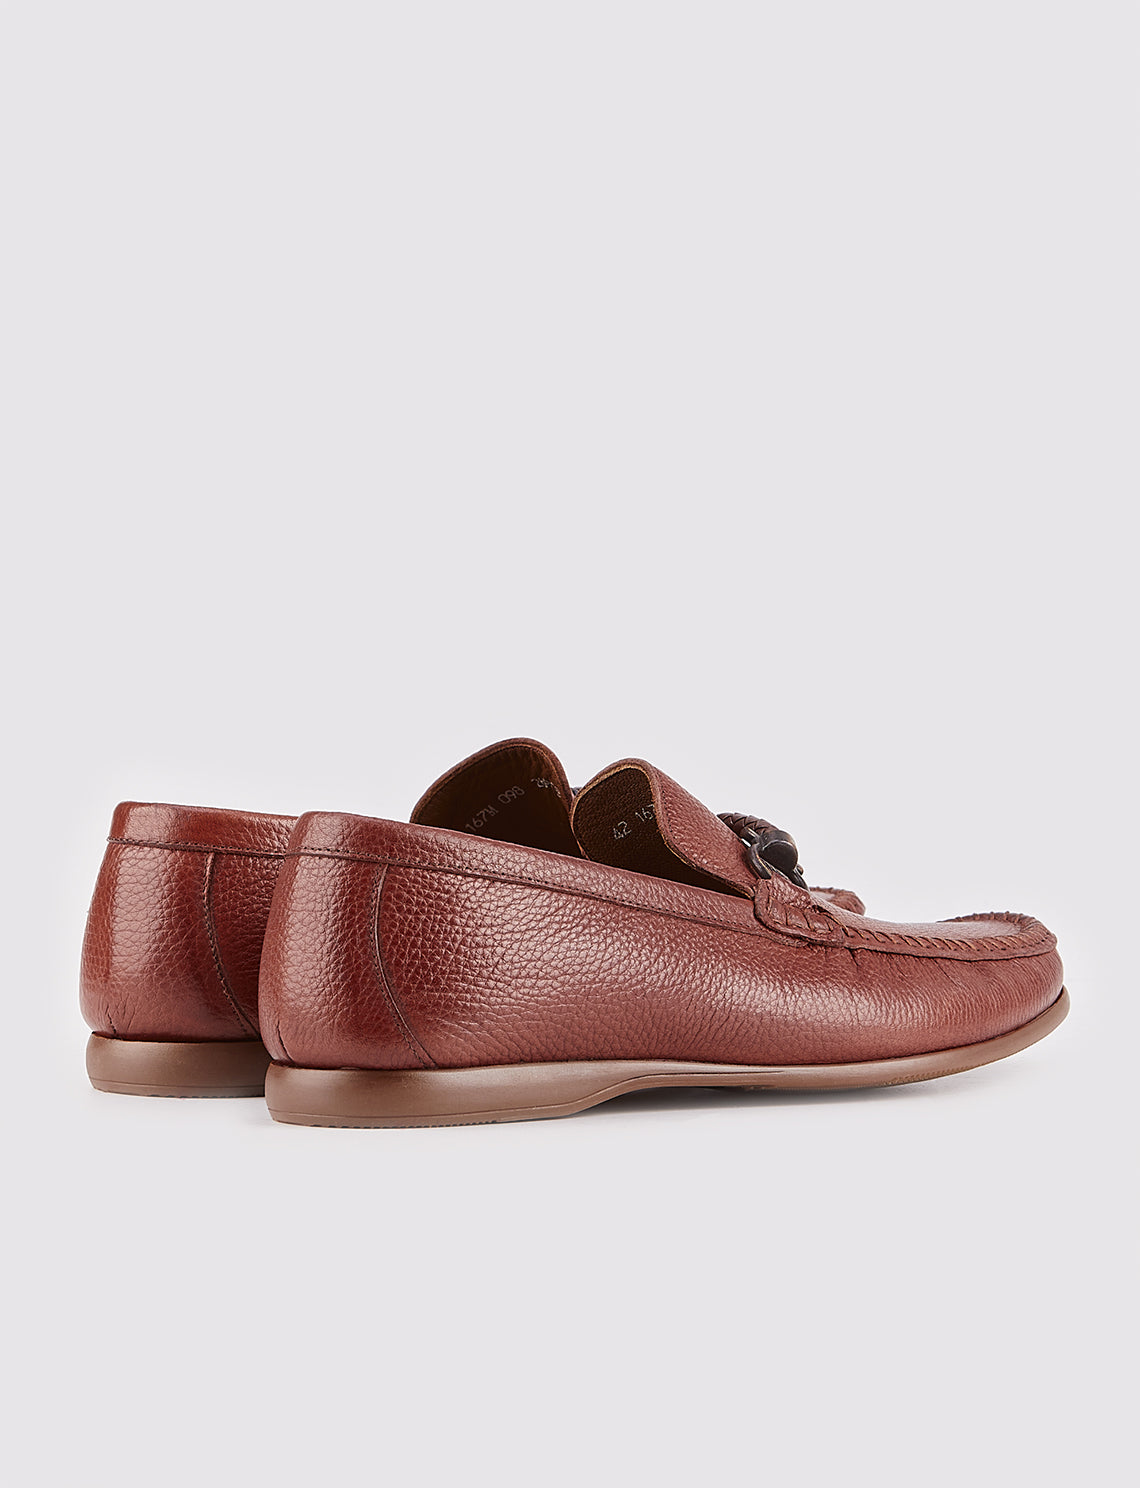 Genuine Leather Tan Men Loafers